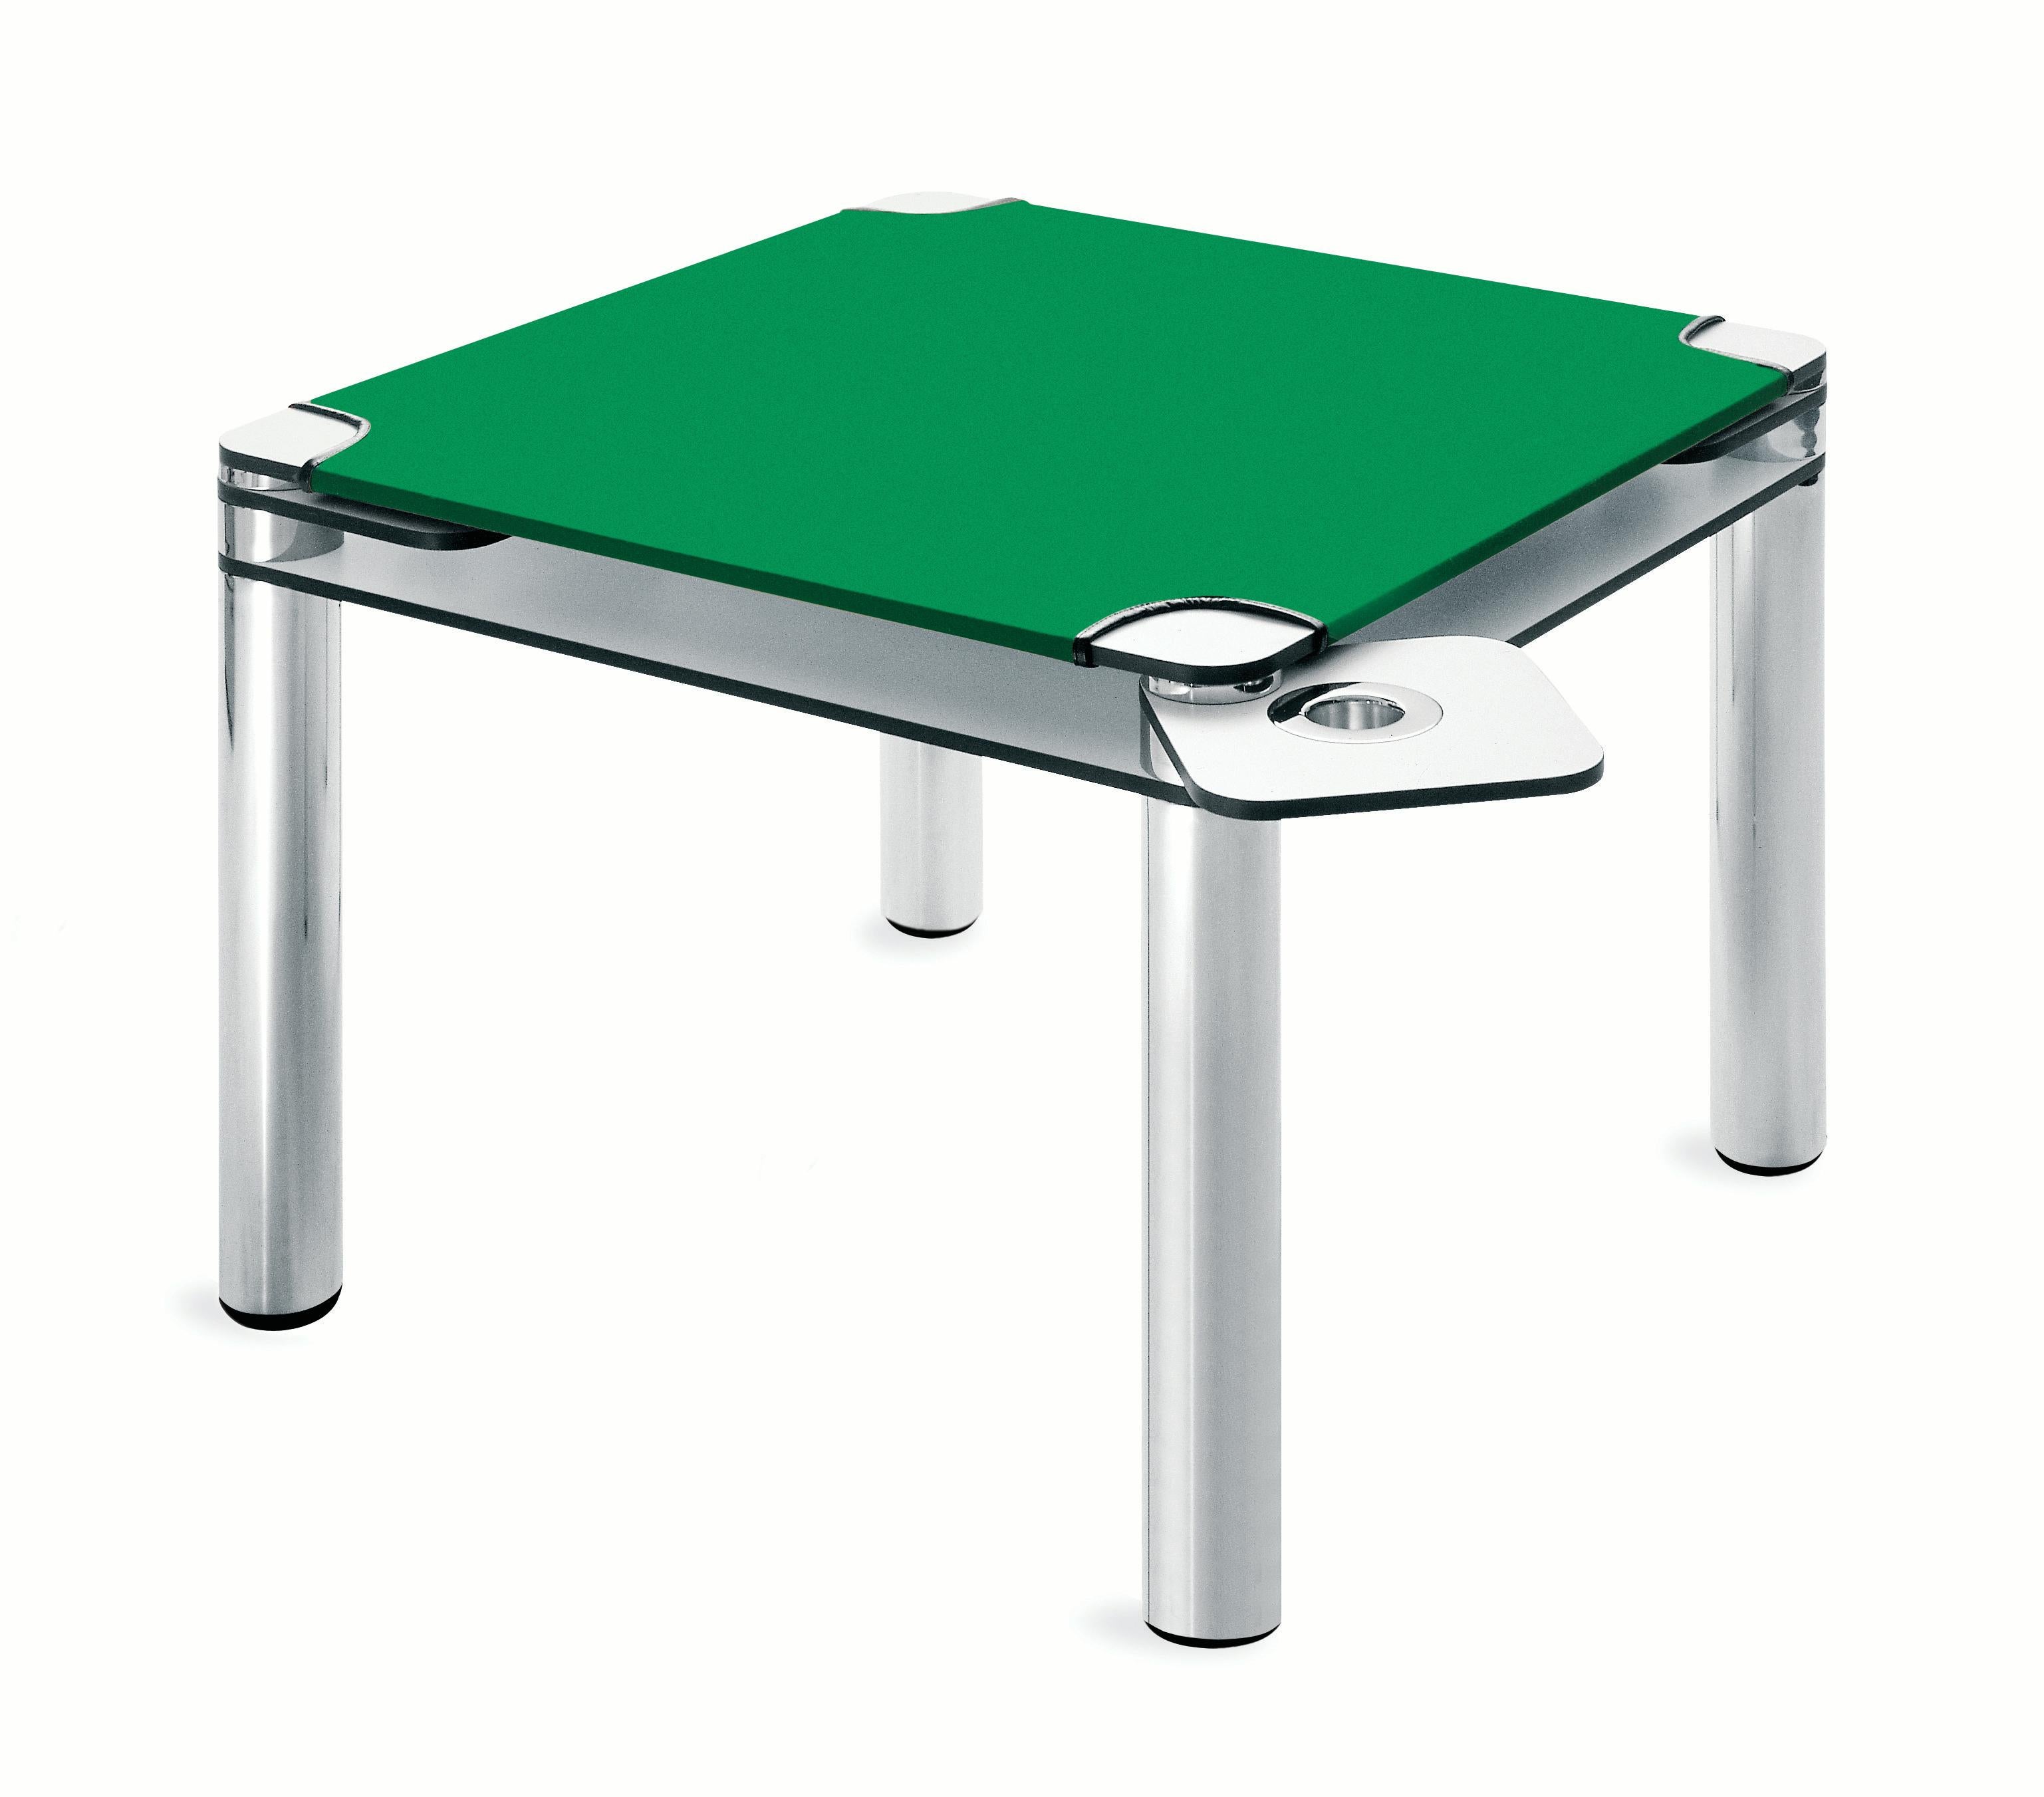 Zanotta Poker Card Table in Double Top White Plastic Laminate and Green Baize Leather by Joe Colombo

Double top in 9/16” thick , white layered plastic laminate. Corner mounted swing-away ashtrays. Removable, leather trimmed green baize. Removable,